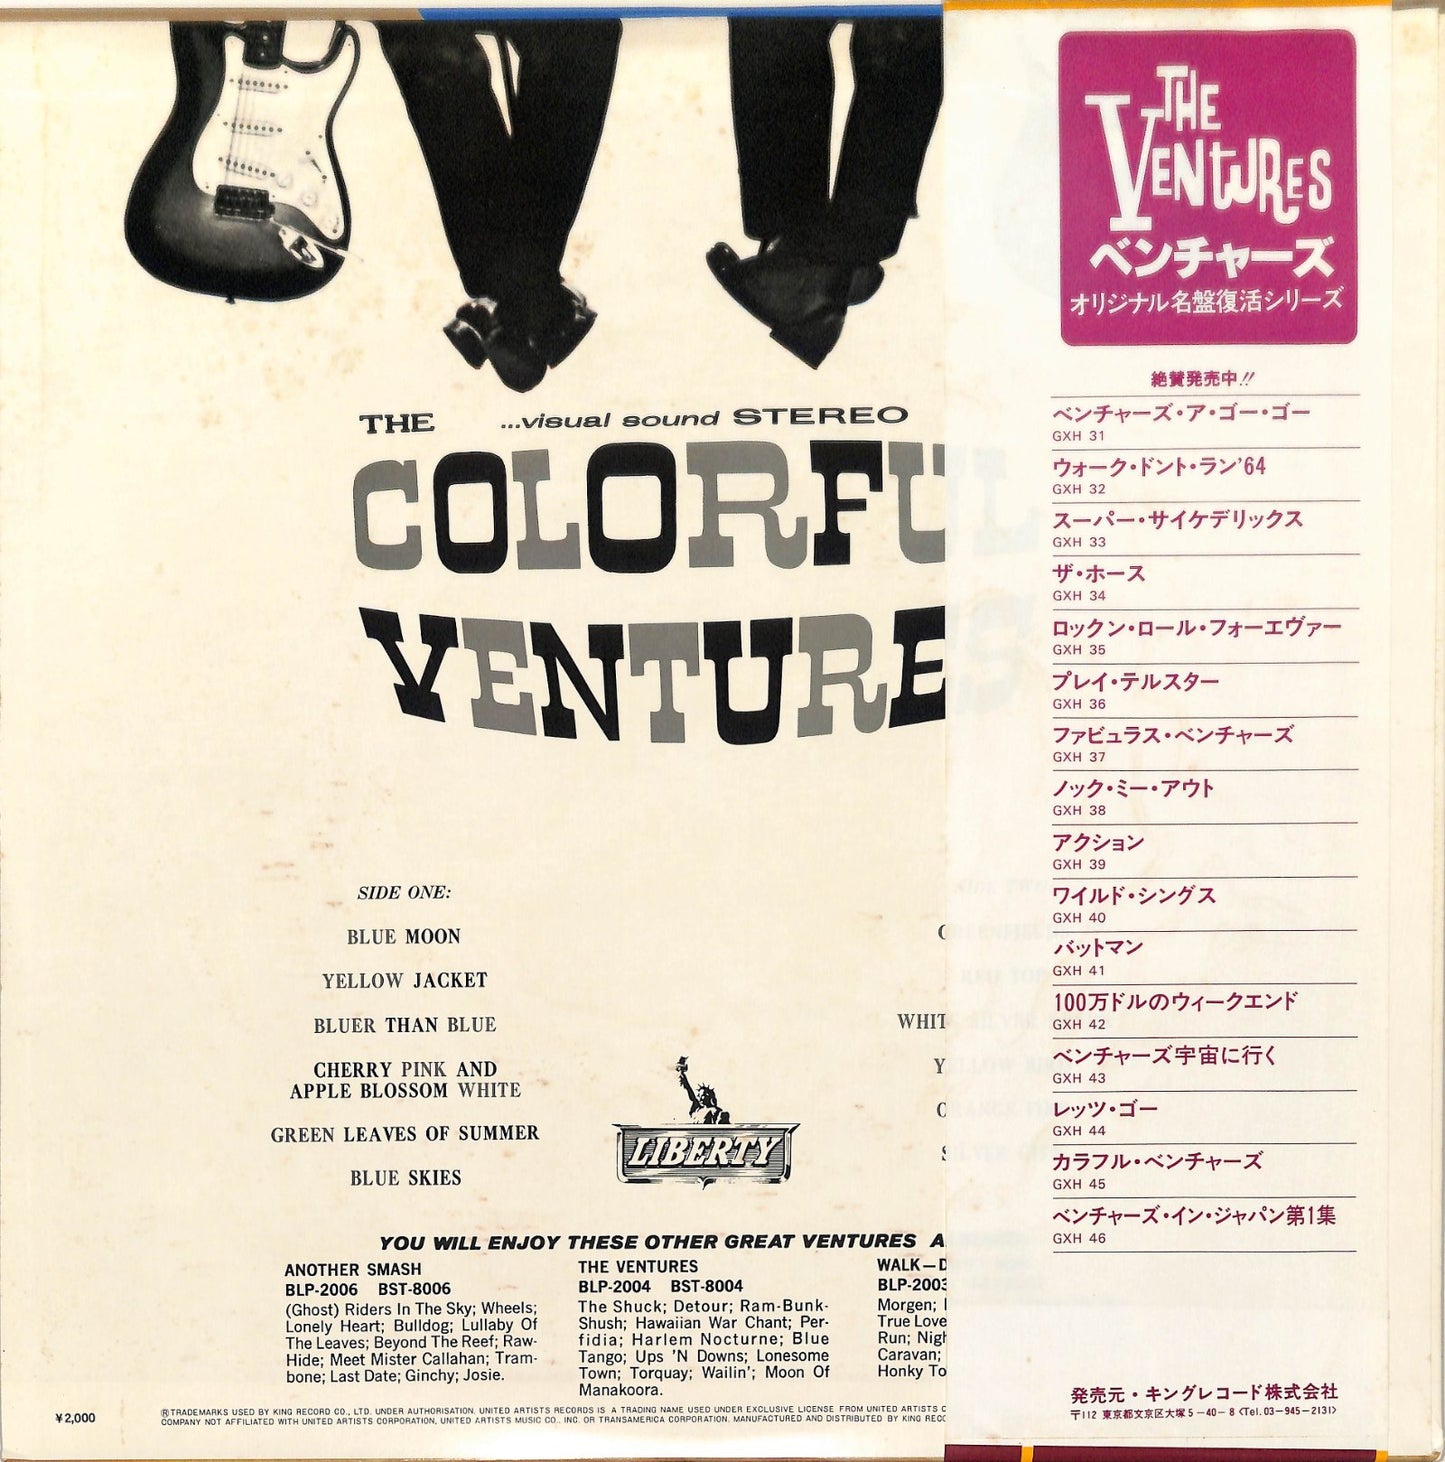 THE VENTURES - The Colorful Ventures